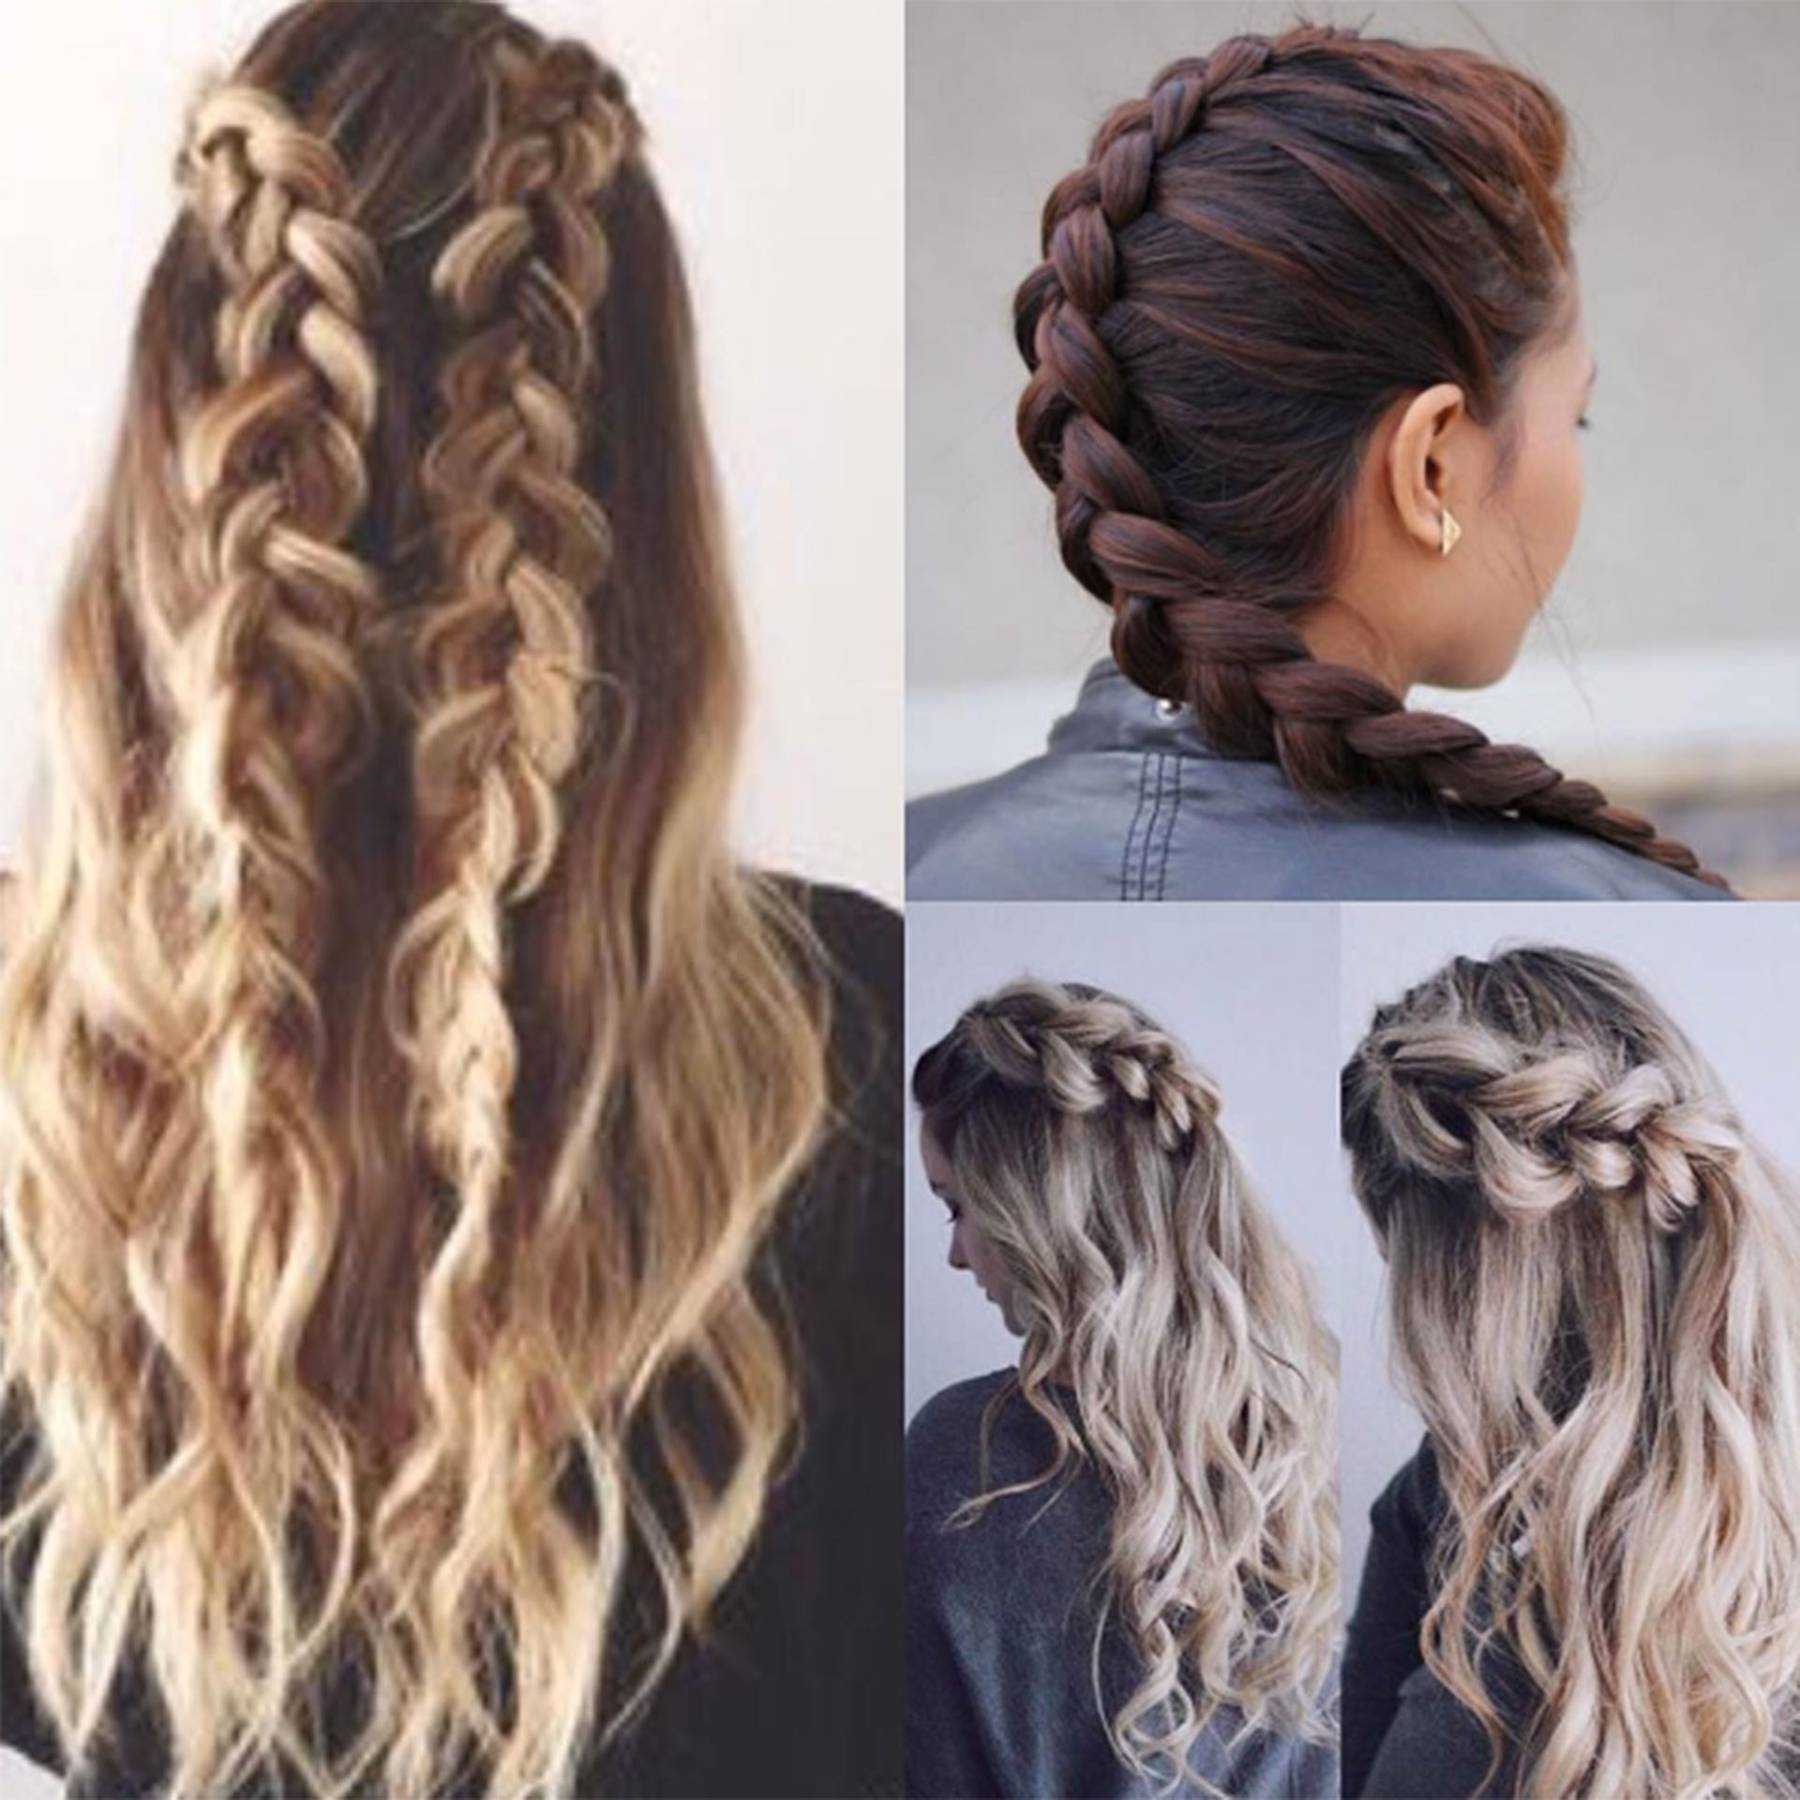 Best braid and plait ideas from instagram | Glamour UK